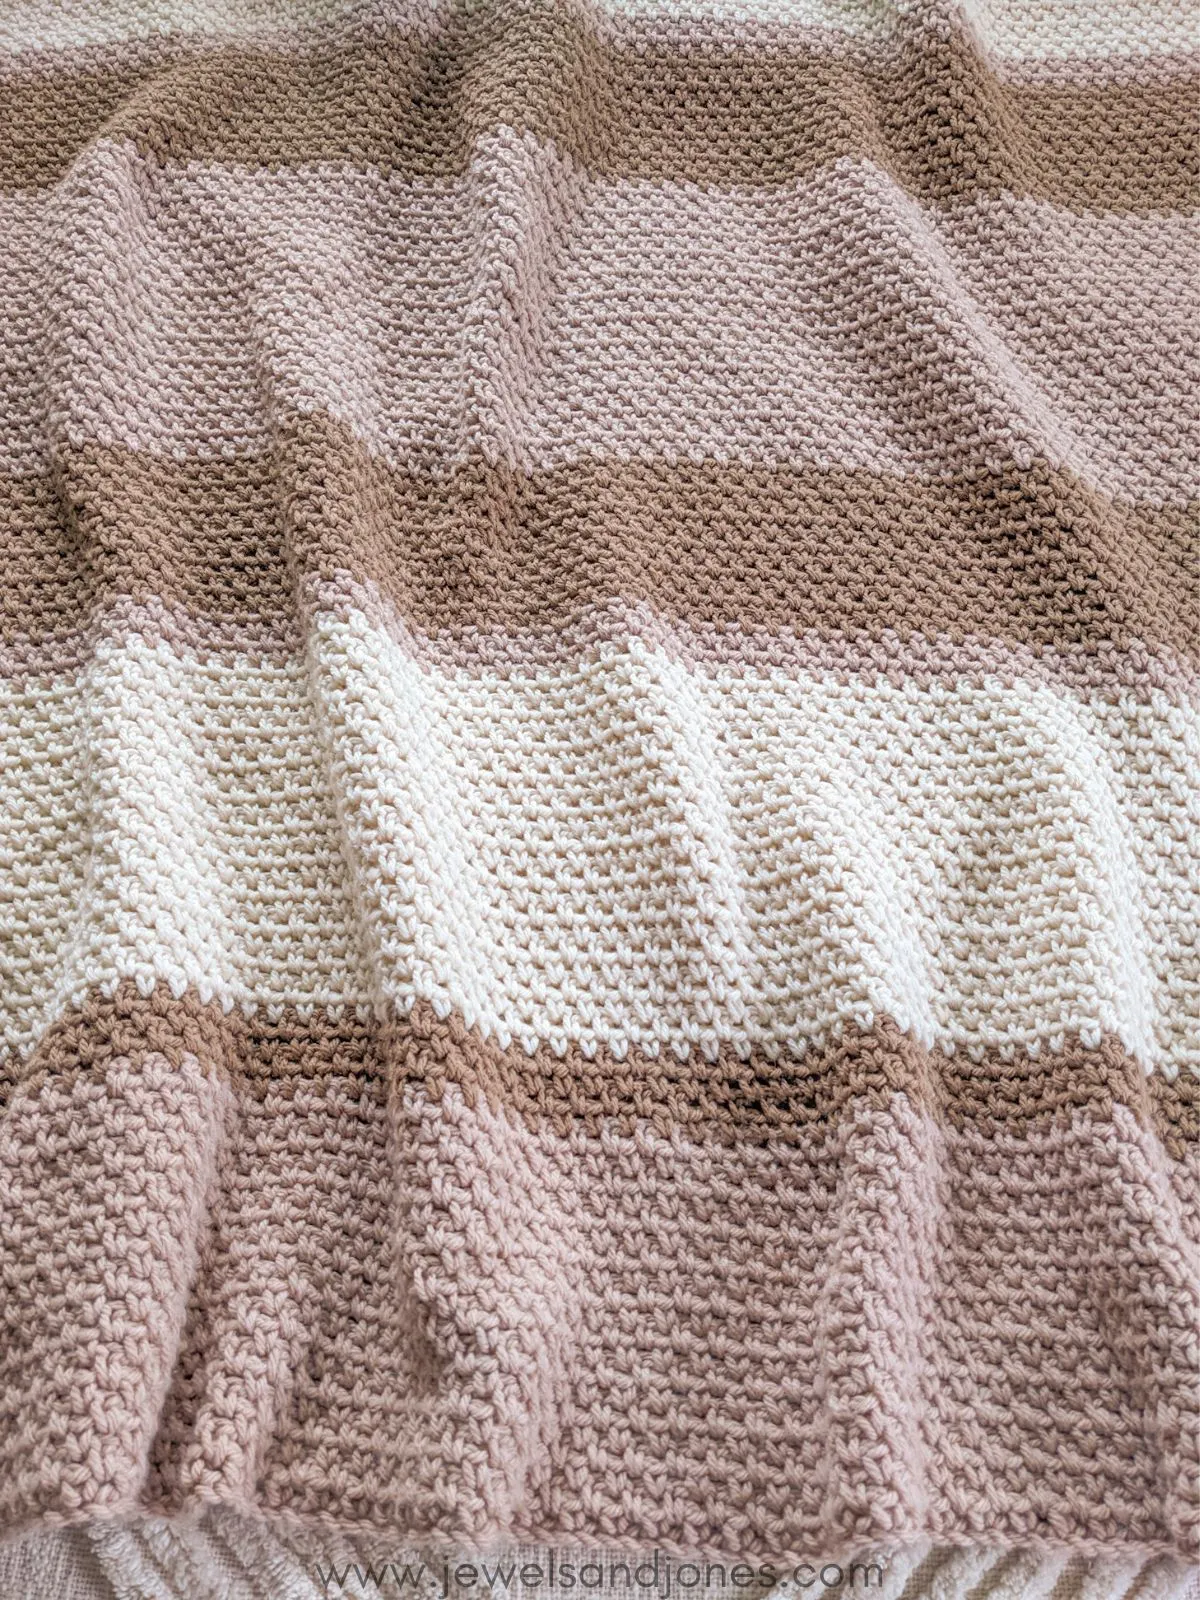 A crochet blanket that has 3 different colors, white, brown, and light pink. 